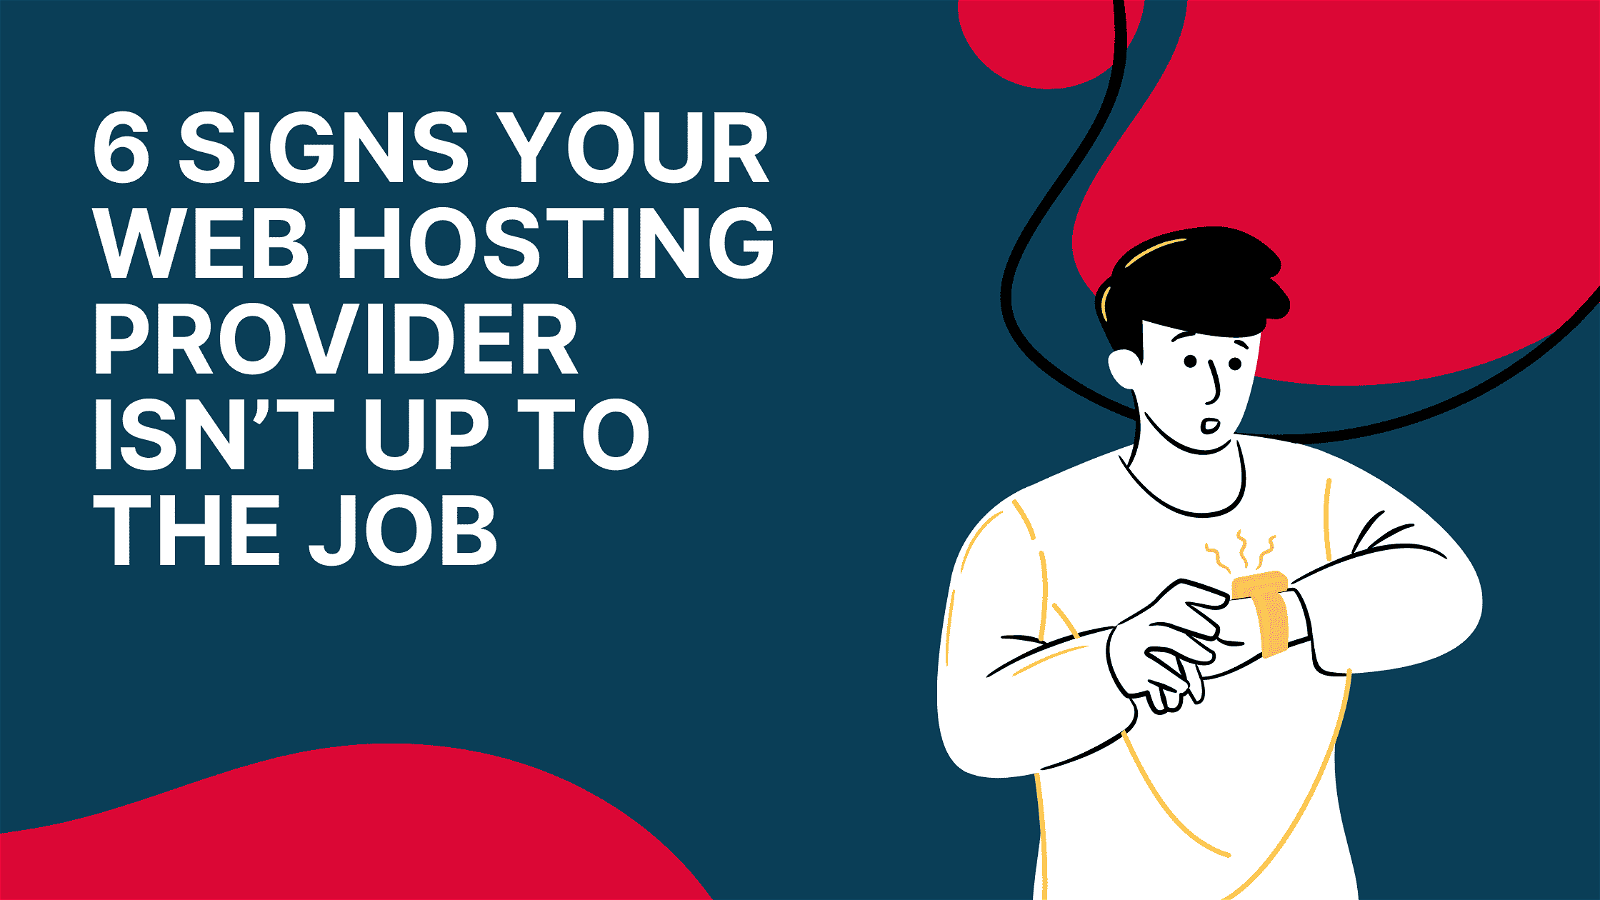 6 signs your web hosting provider isn’t up to the job